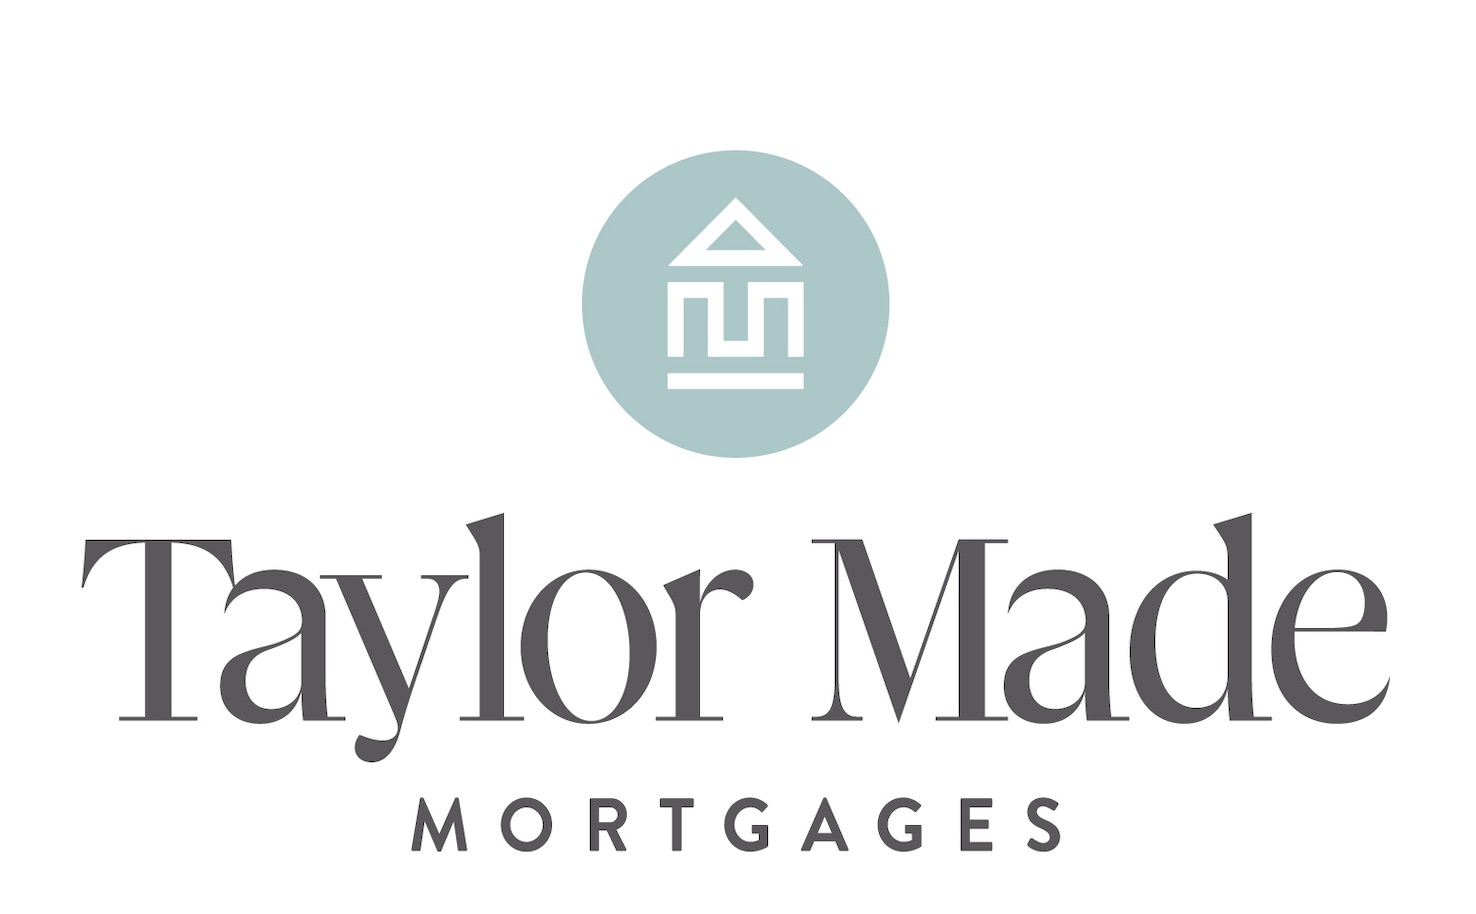 Taylor Made Mortgages logo design by logo designer Robin Honey Brand Consultant for your inspiration and for the worlds largest logo competition